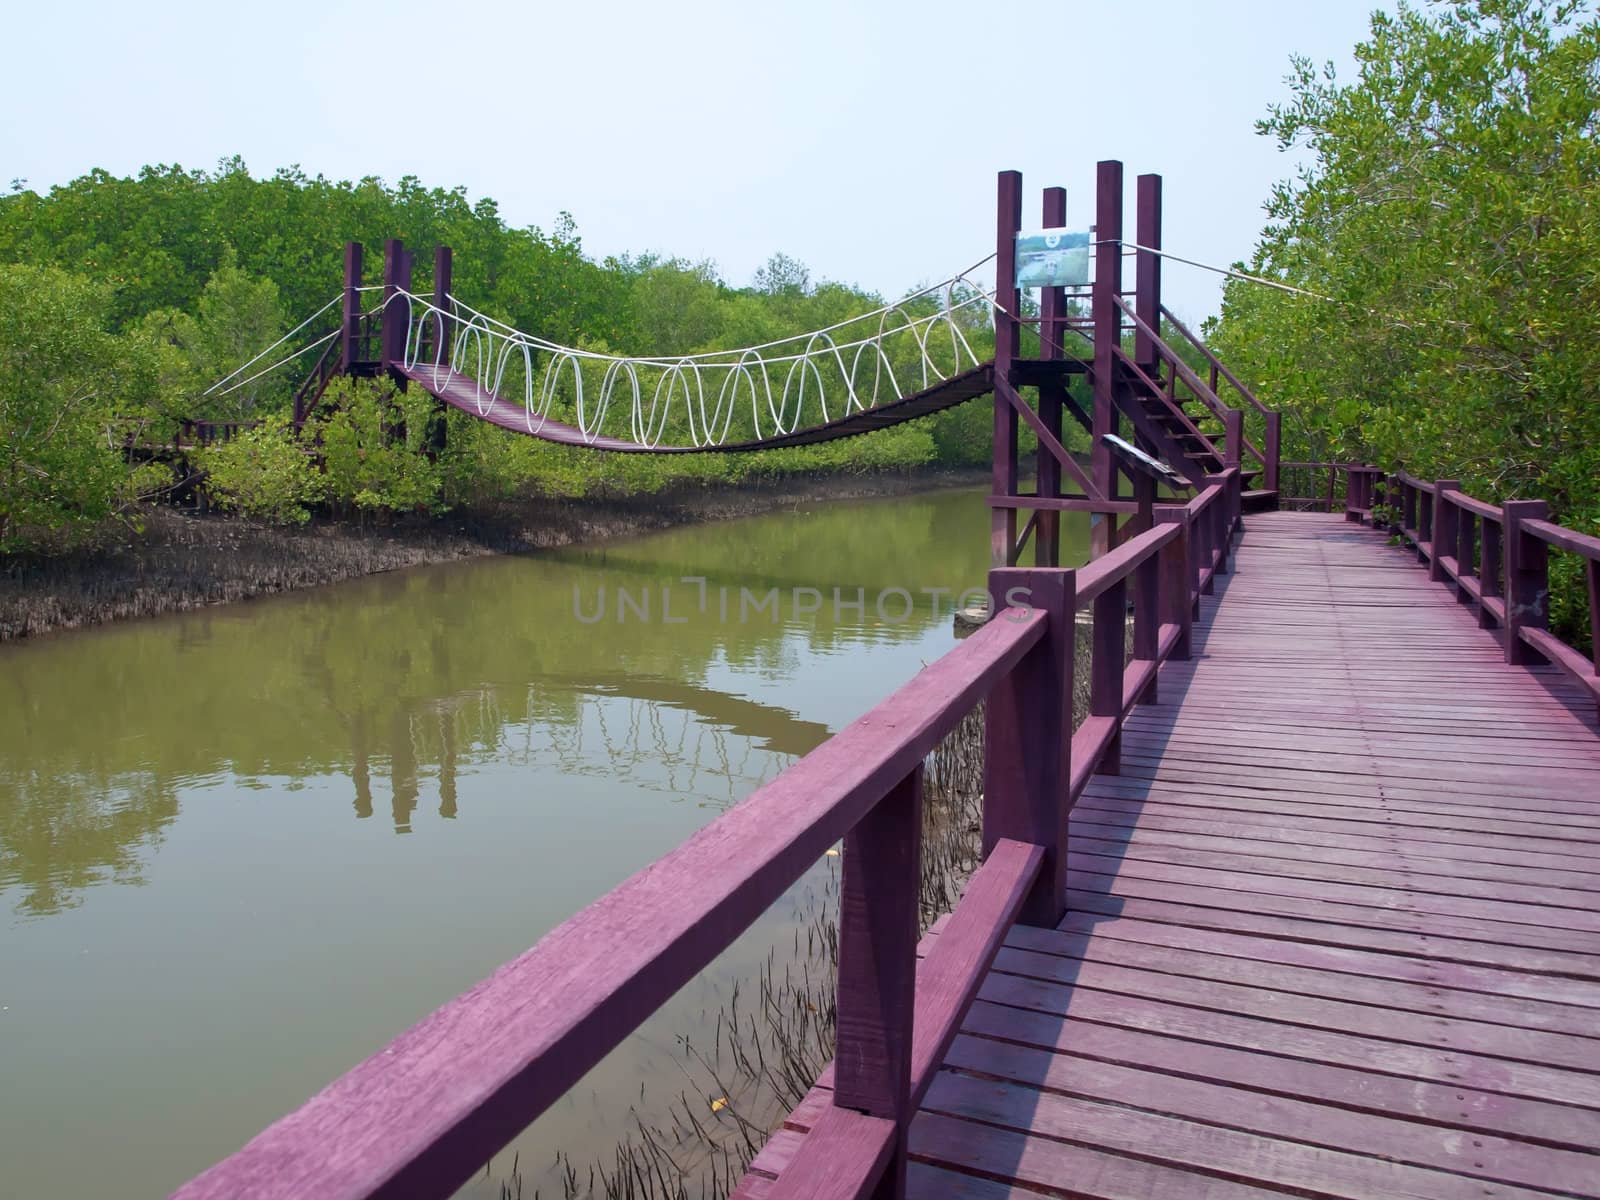 Rope bridge cross over canal in mangrove forest